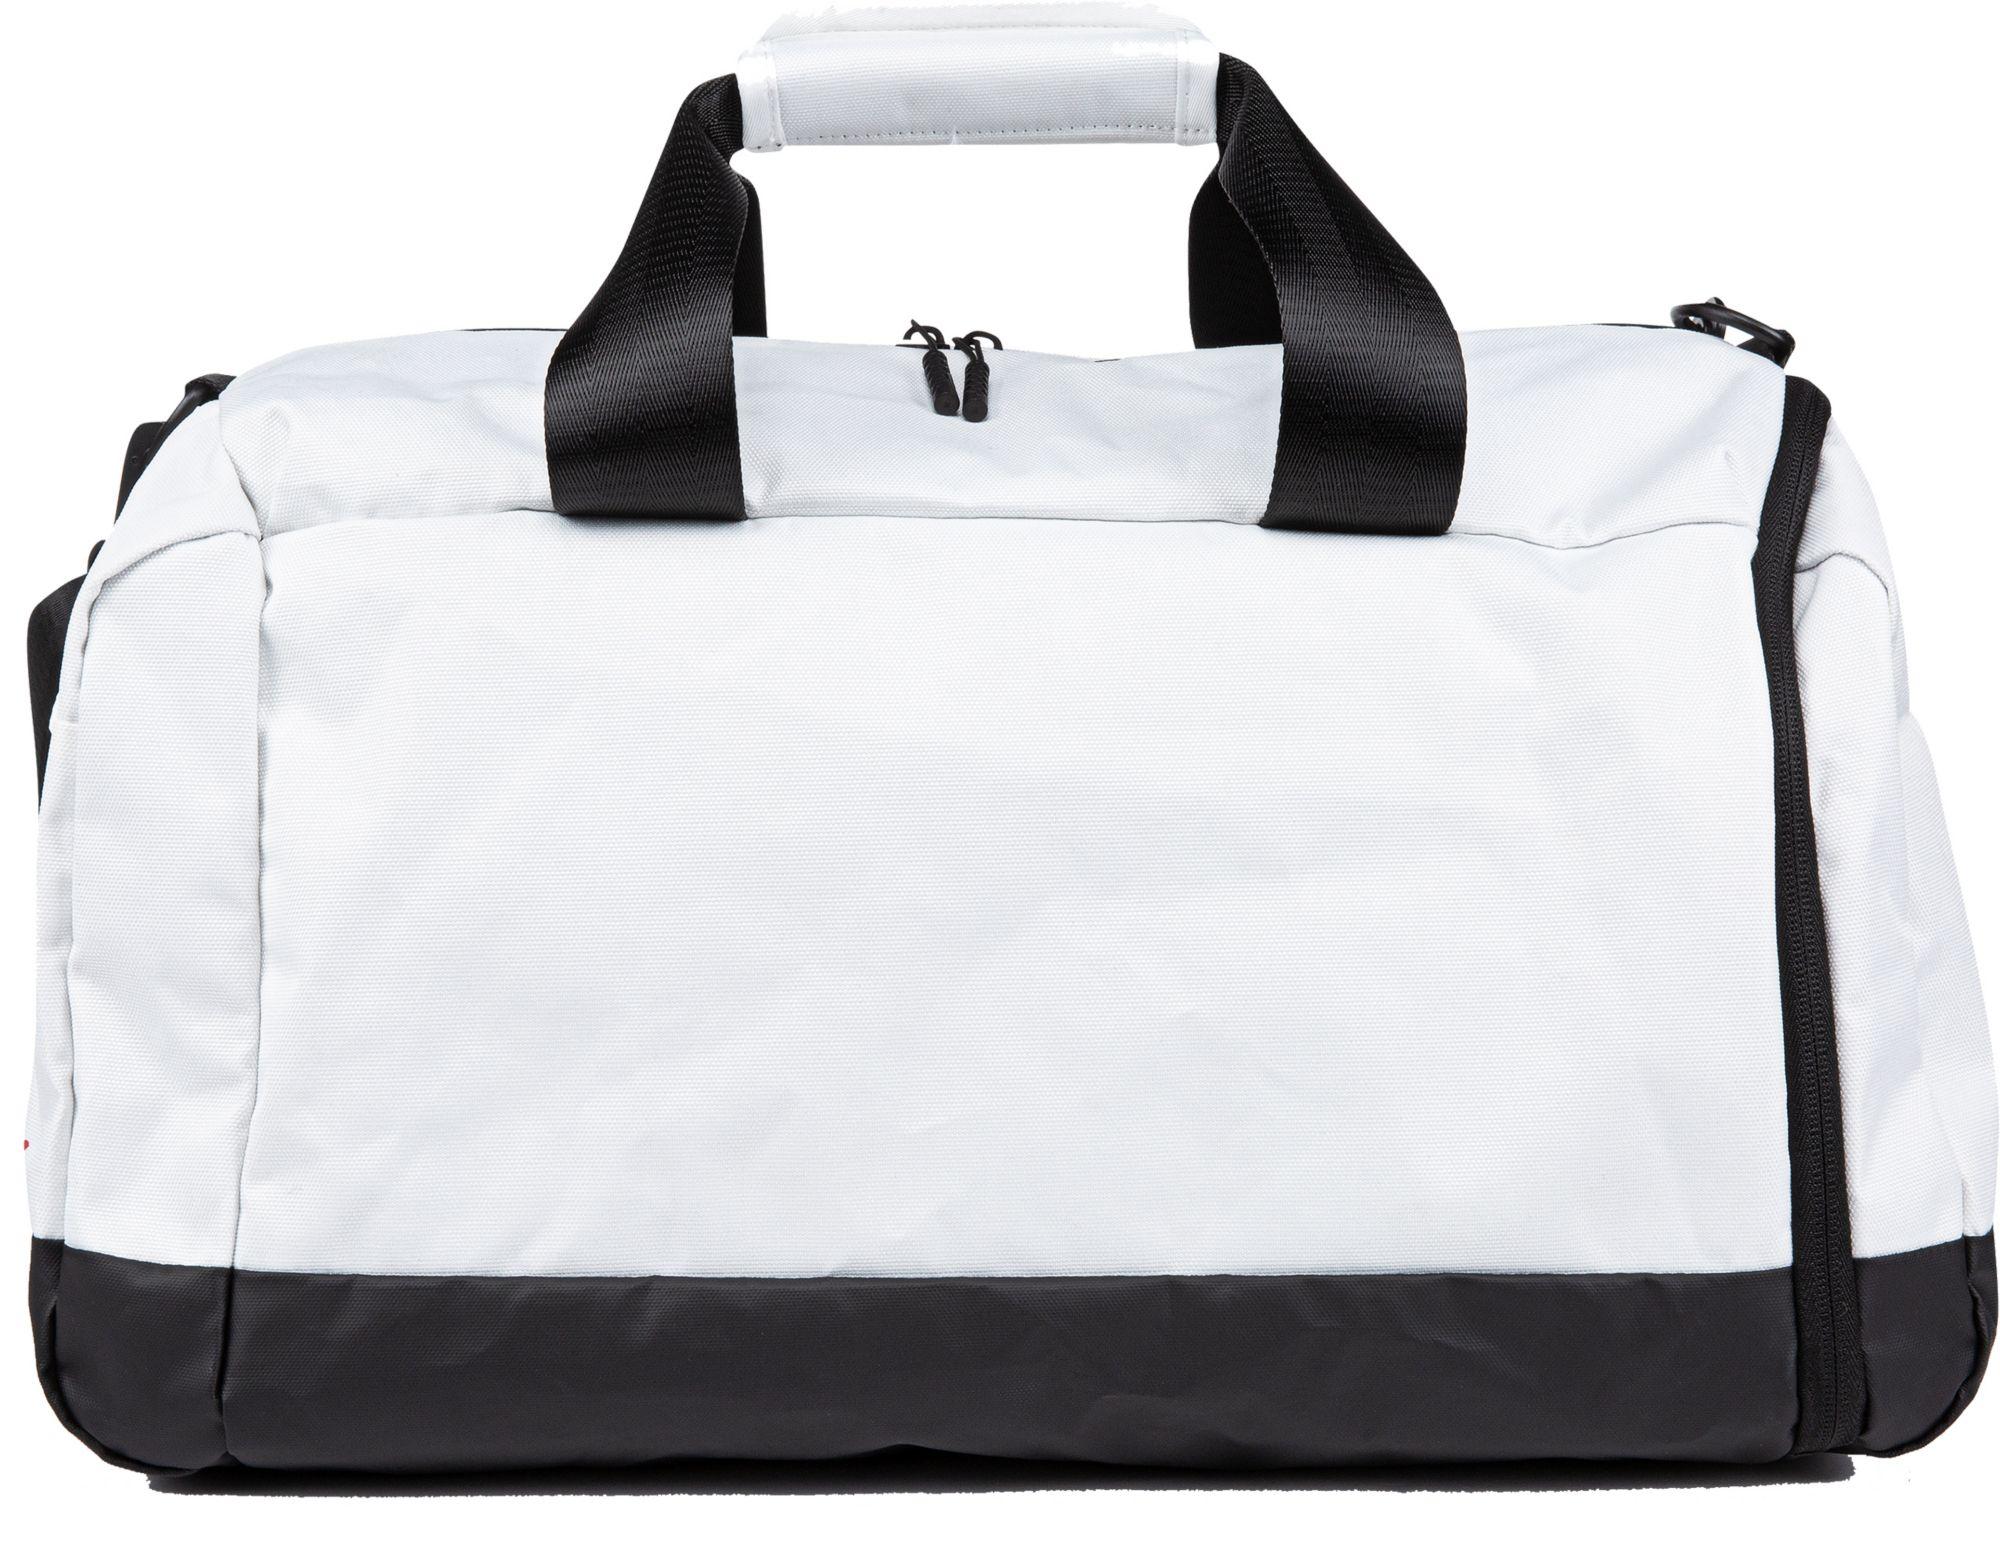 Nike Synthetic Velocity Duffle Bag in 